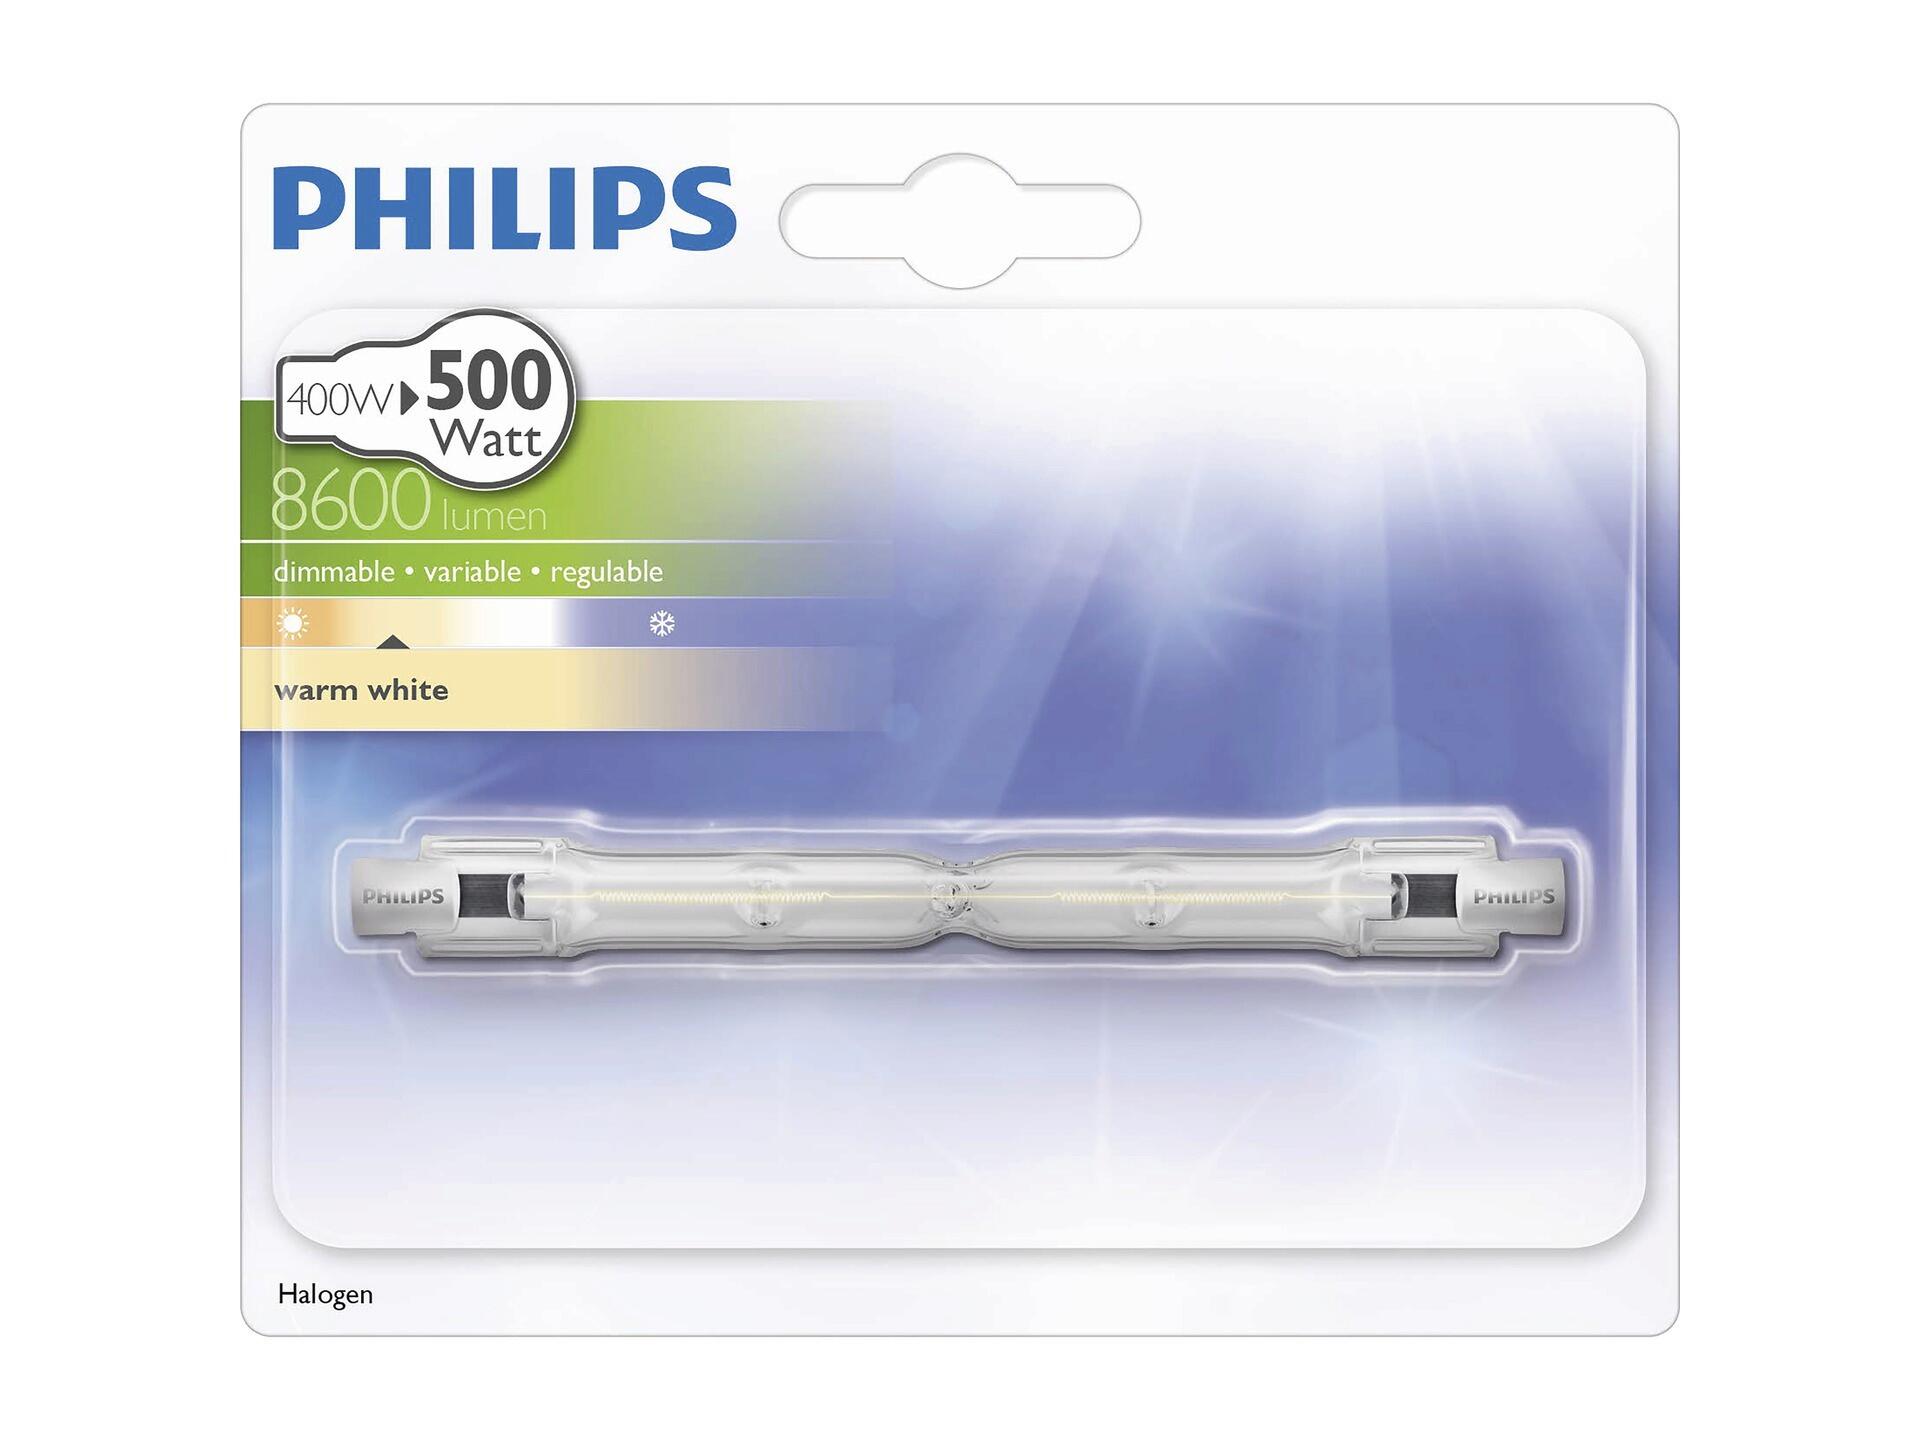 Vermeend melodie maniac Philips EcoHalo halogeen staaflamp R7s 400W | Hubo